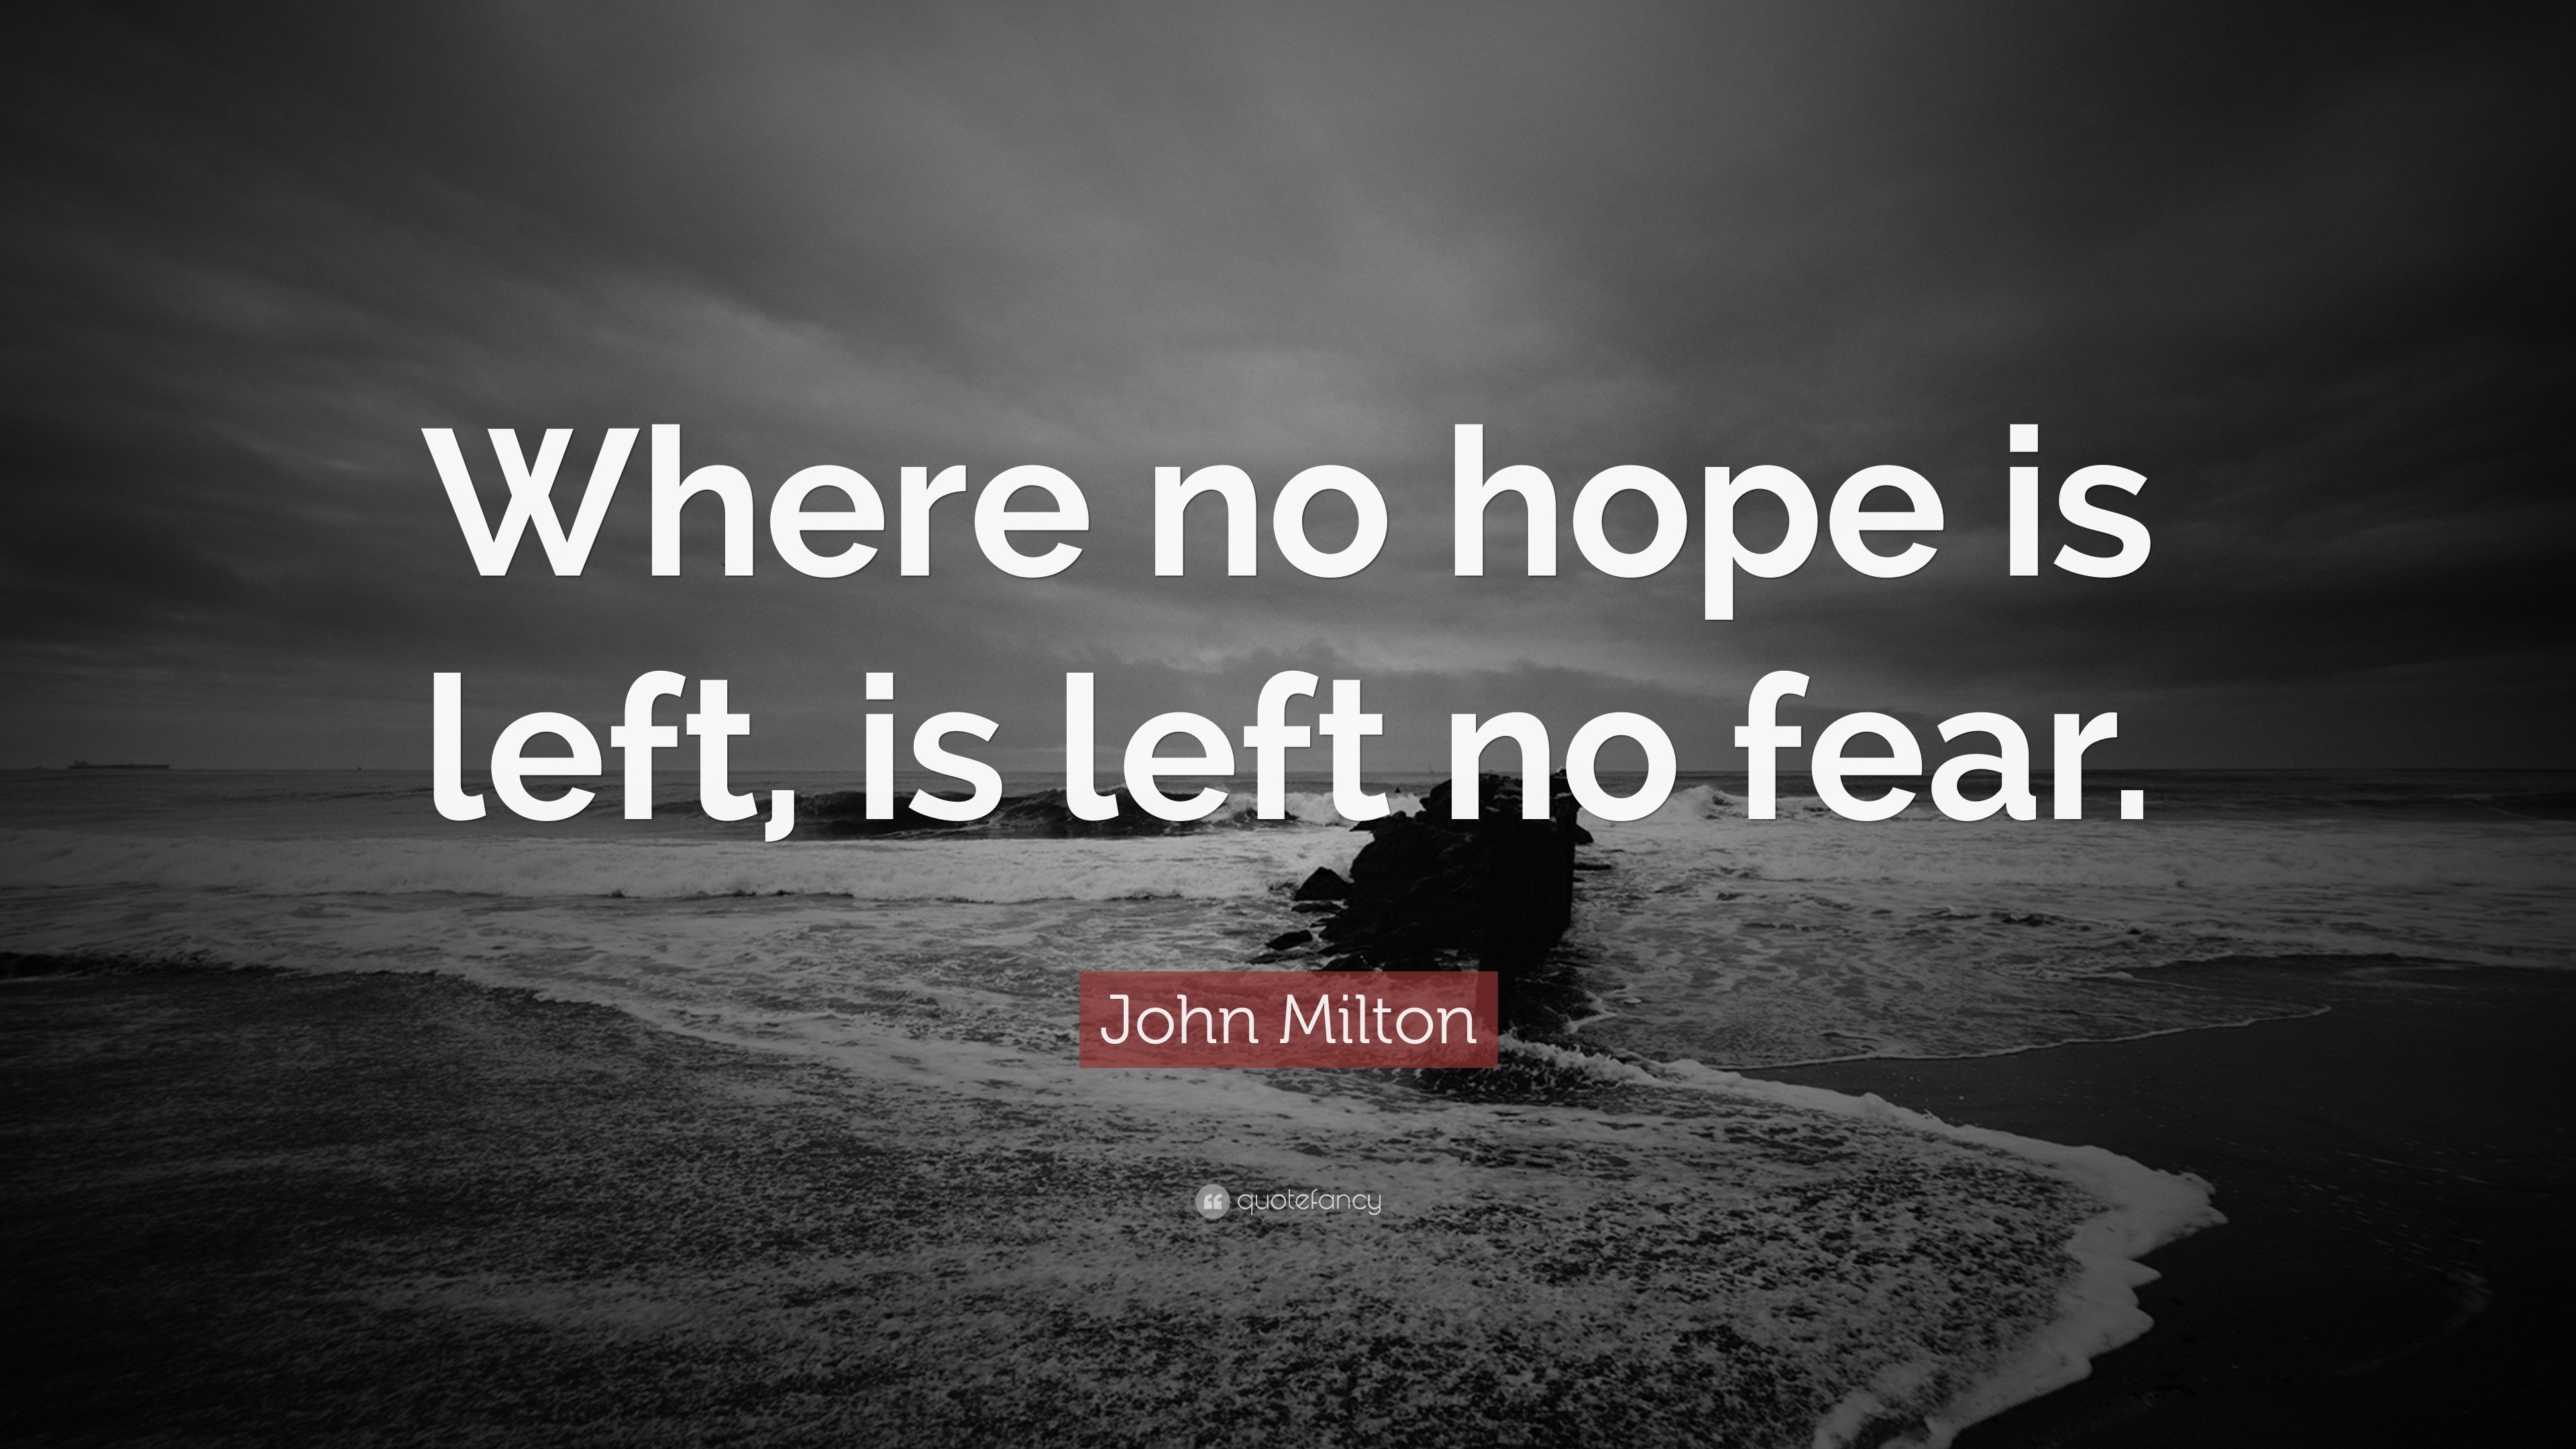 3840x2160 John Milton Quote: “Where no hope is left, is left no fear.